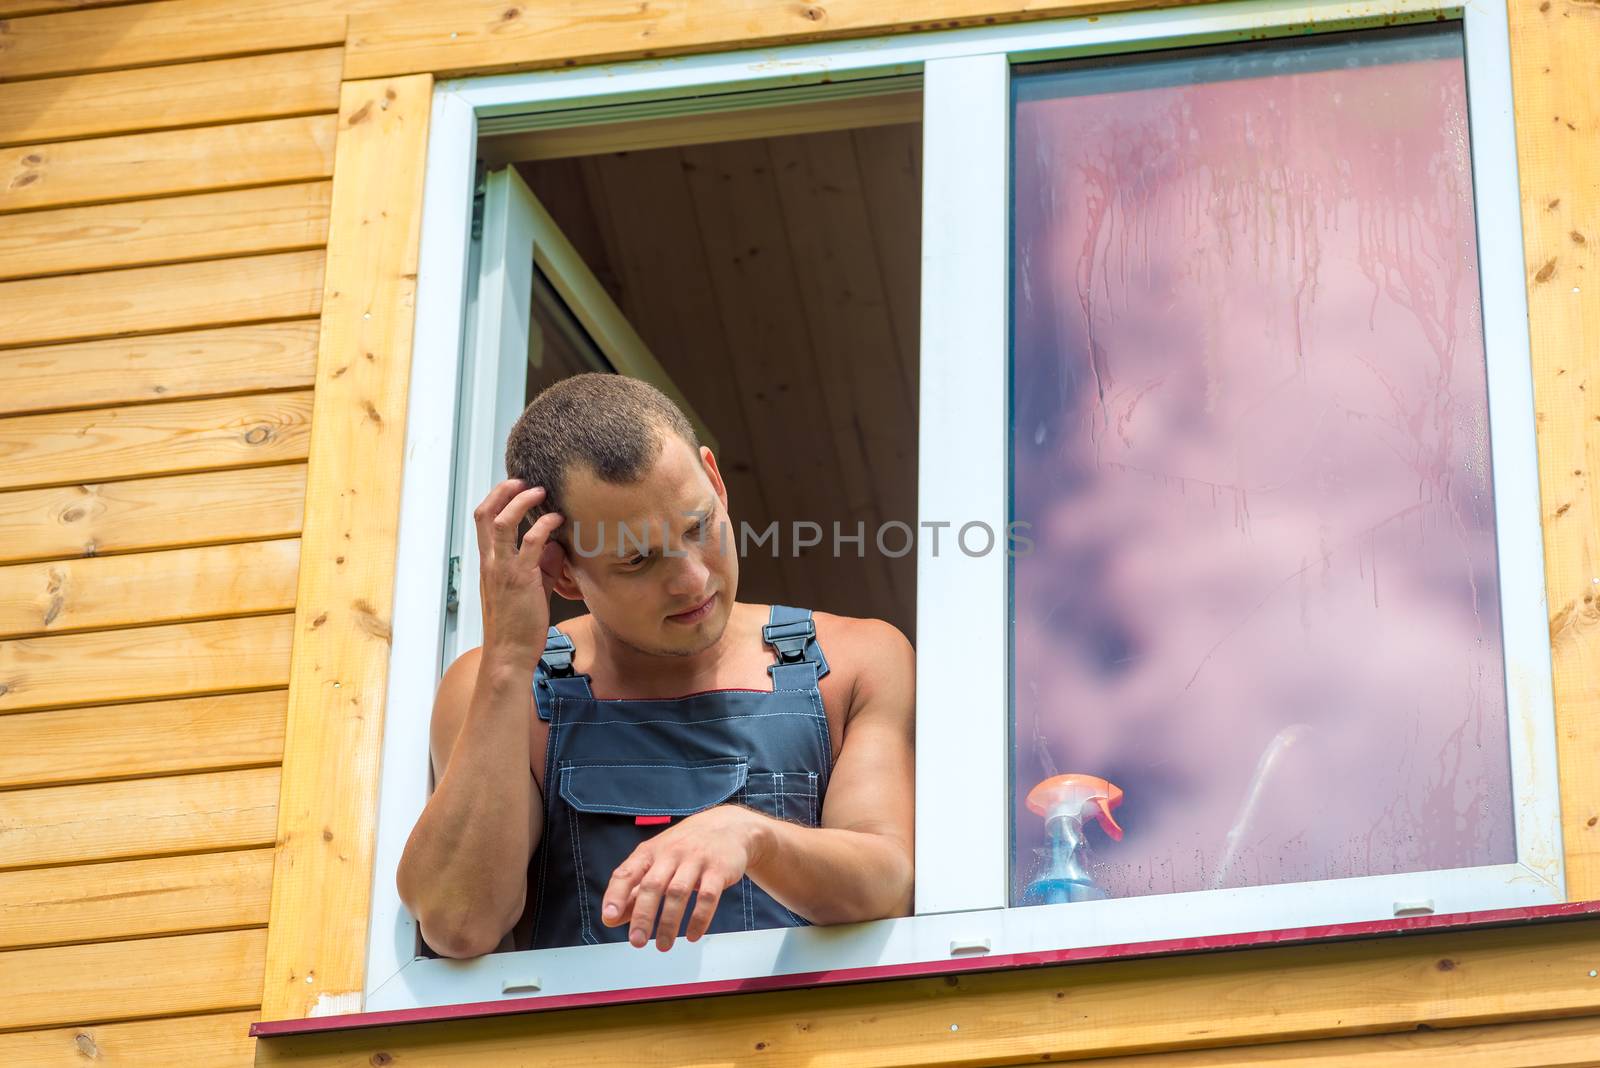 Pensive man in overalls reflects on washing the window in the ho by kosmsos111